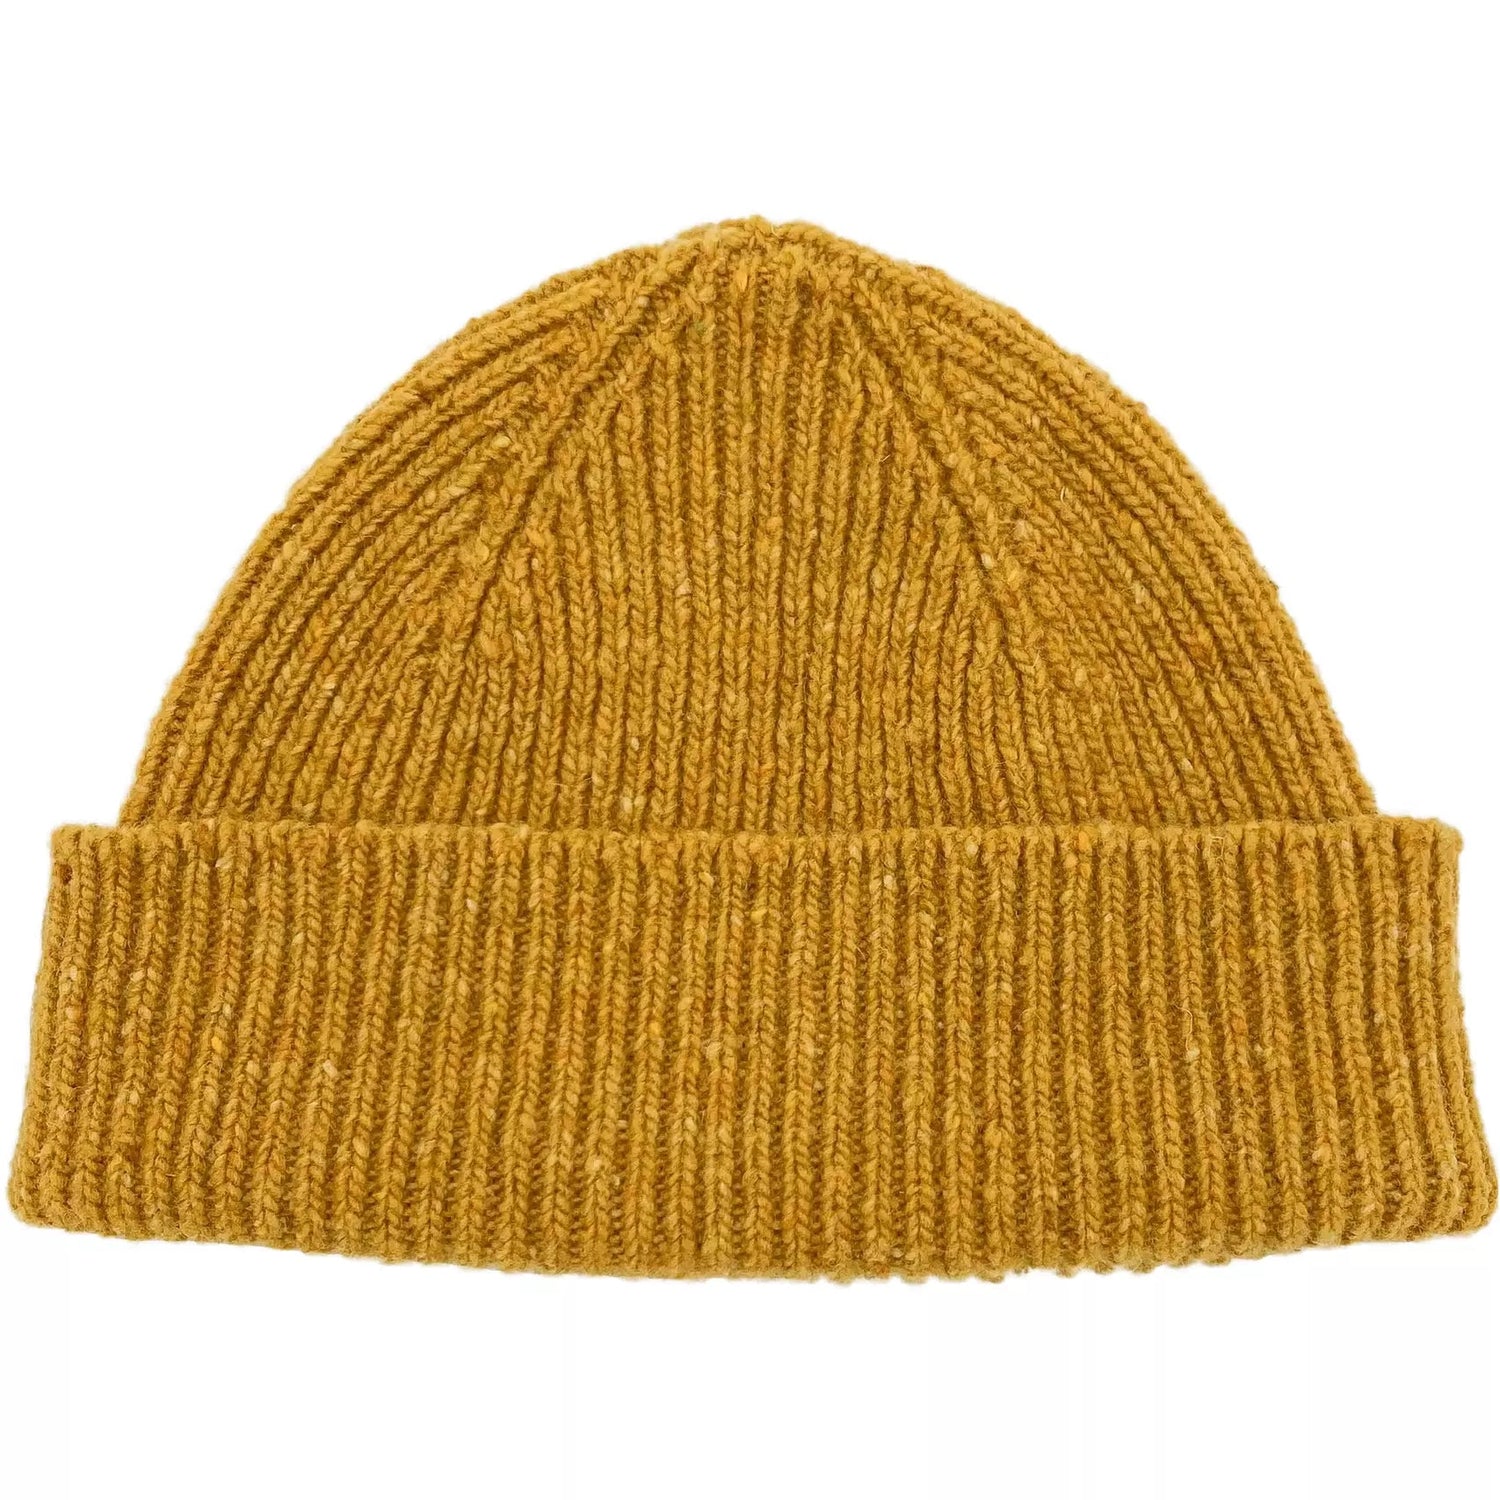 Speckled Donegal Wool Hat - escape